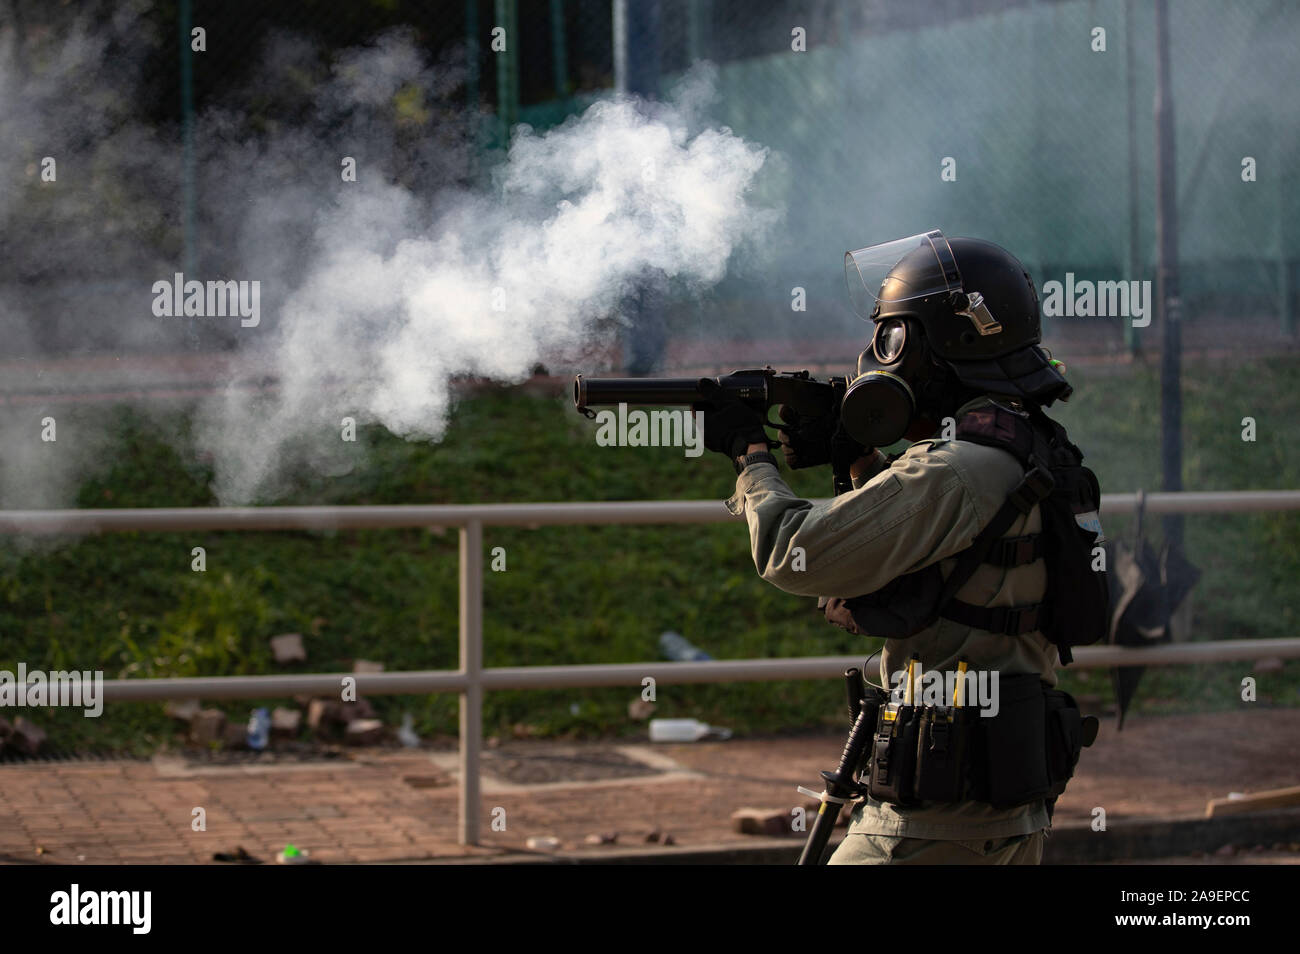 Police fire teargas during the crack down. An unprecedented battles at Chinese University Hong Kong (CUHK).  Hong Kong protest continuous on its fifth months. A citywide strike called for started on Monday 11 November, 2019 which brought parts of Hong Kong to halt as MTR stations closed and multiple roadblocks were erected. Hong Kong, 12.11.2019 Stock Photo